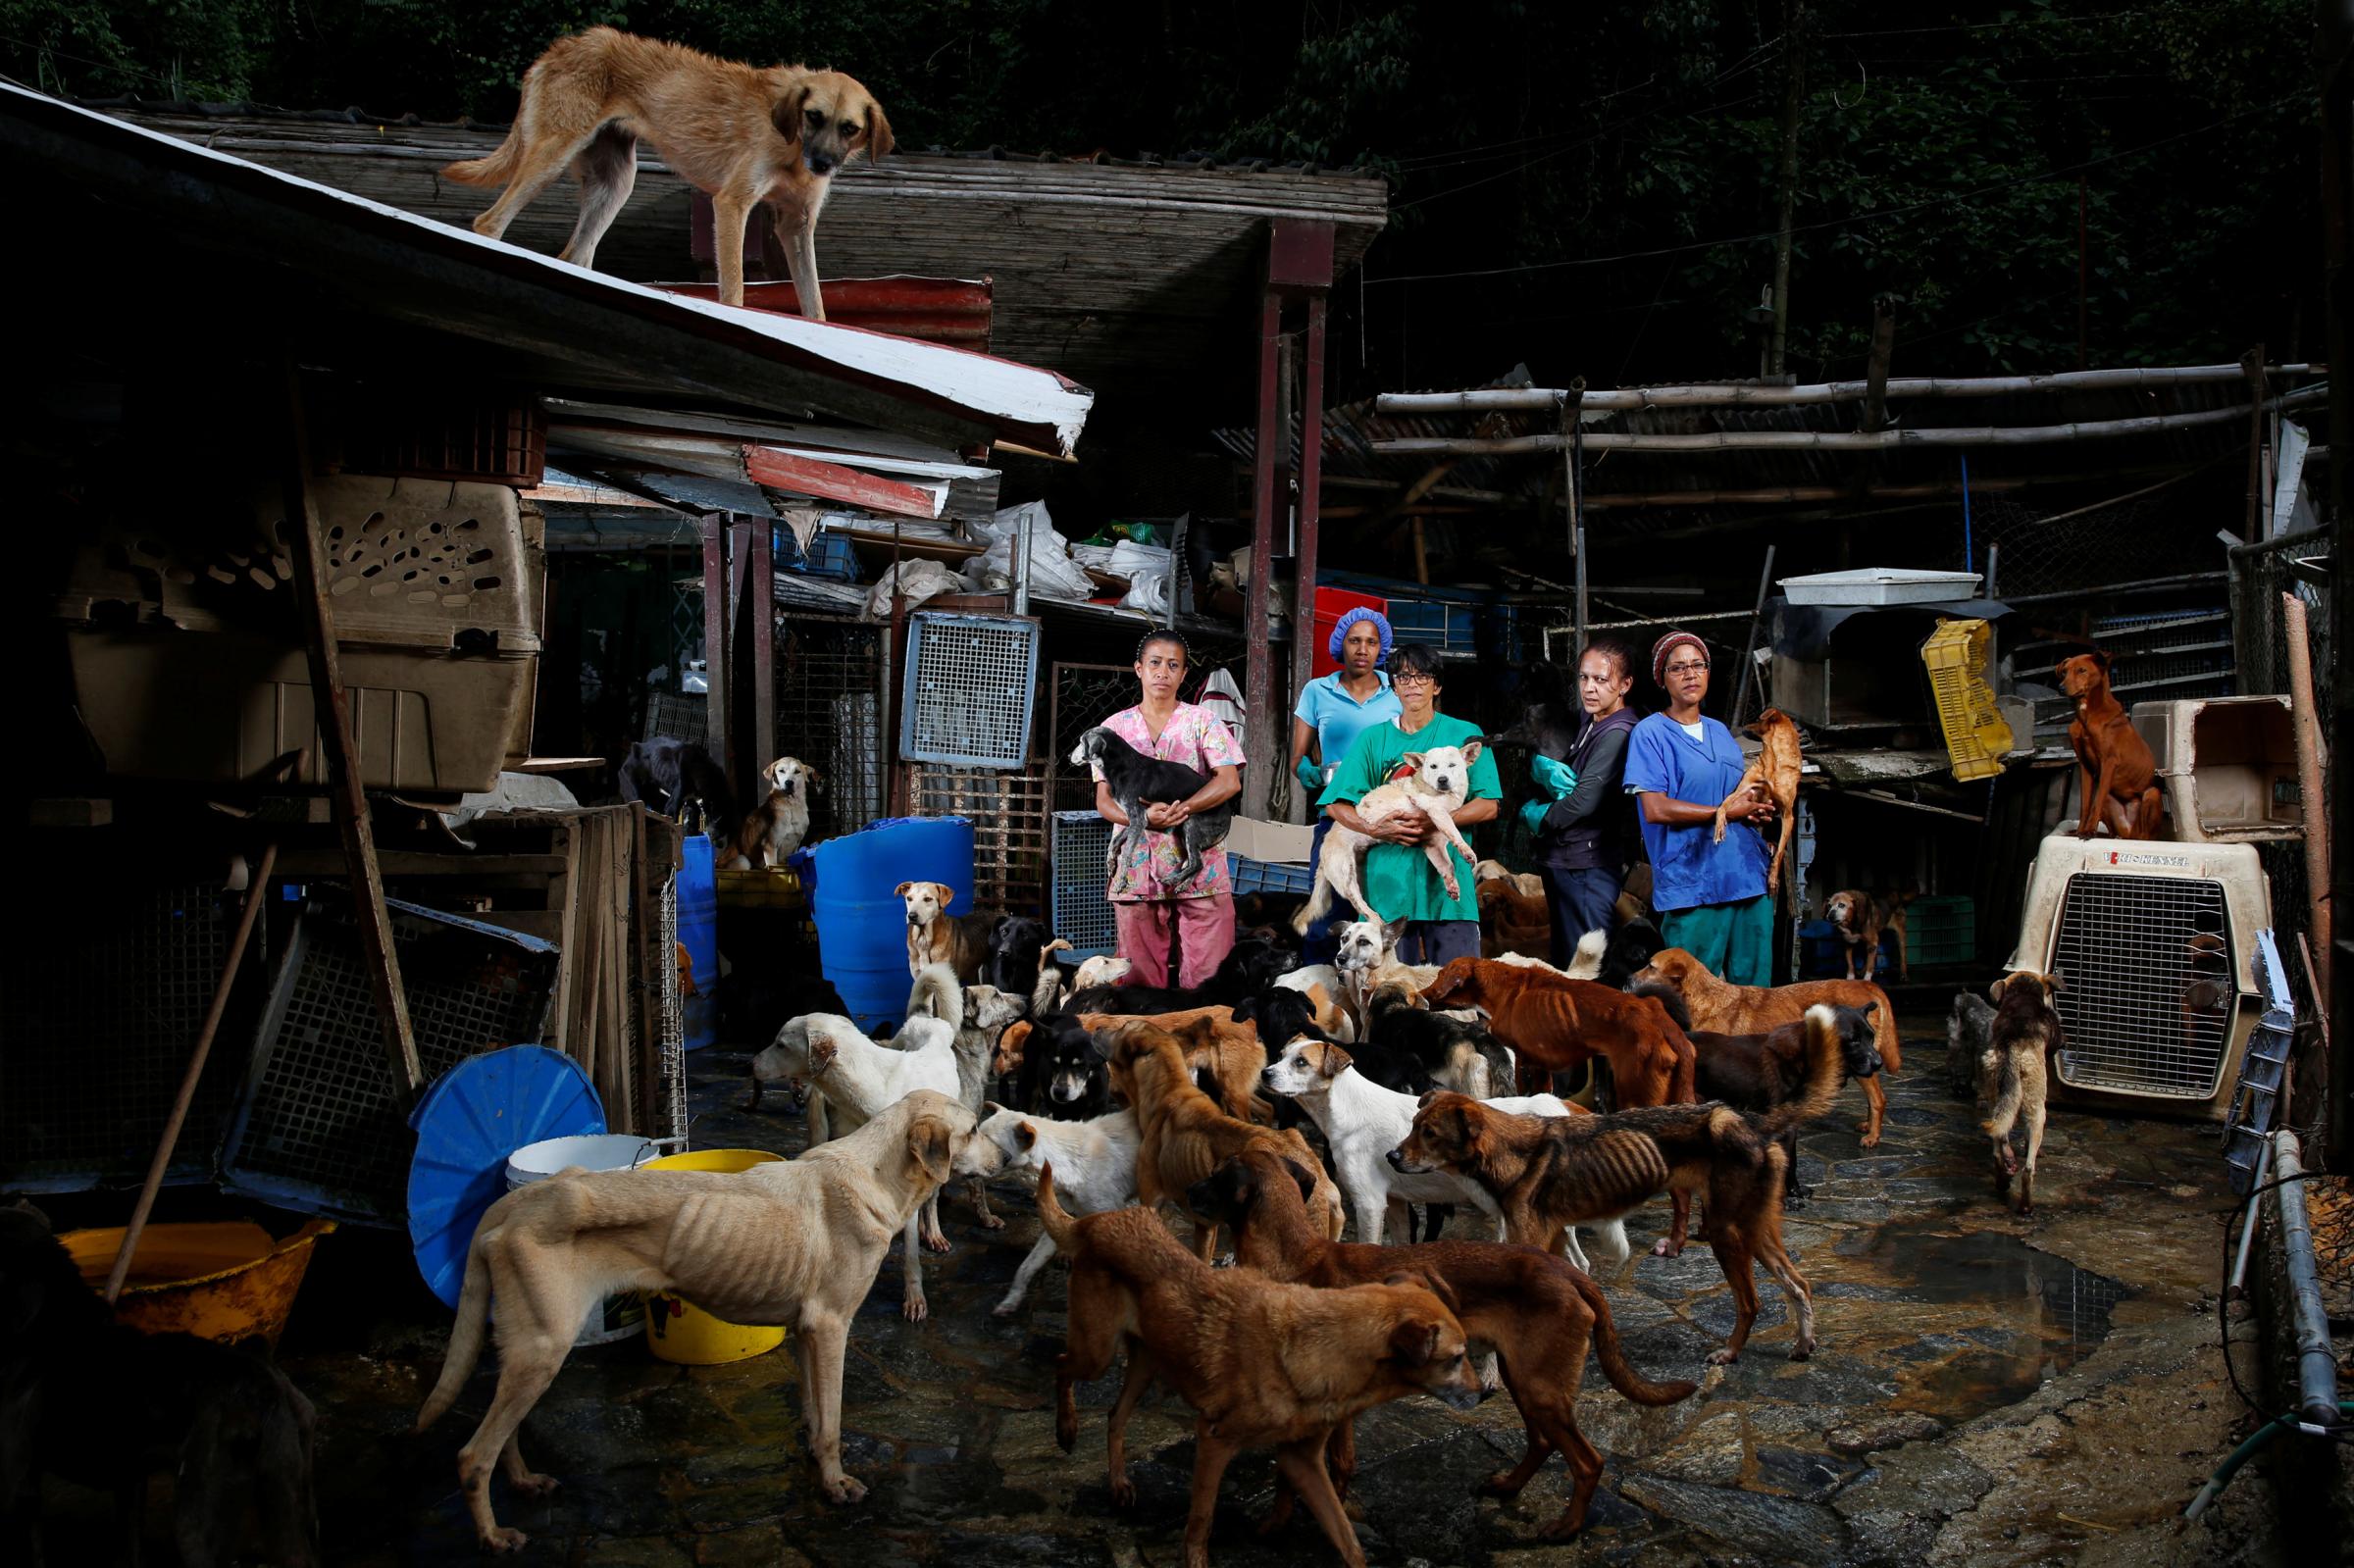 From left: Maria Silva, Milena Cortes, Maria Arteaga, Jackeline Bastidas and Gissy Abello pose for a picture at the Famproa dogs shelter where they work, in Los Teques, Venezuela, on Aug. 25, 2016.